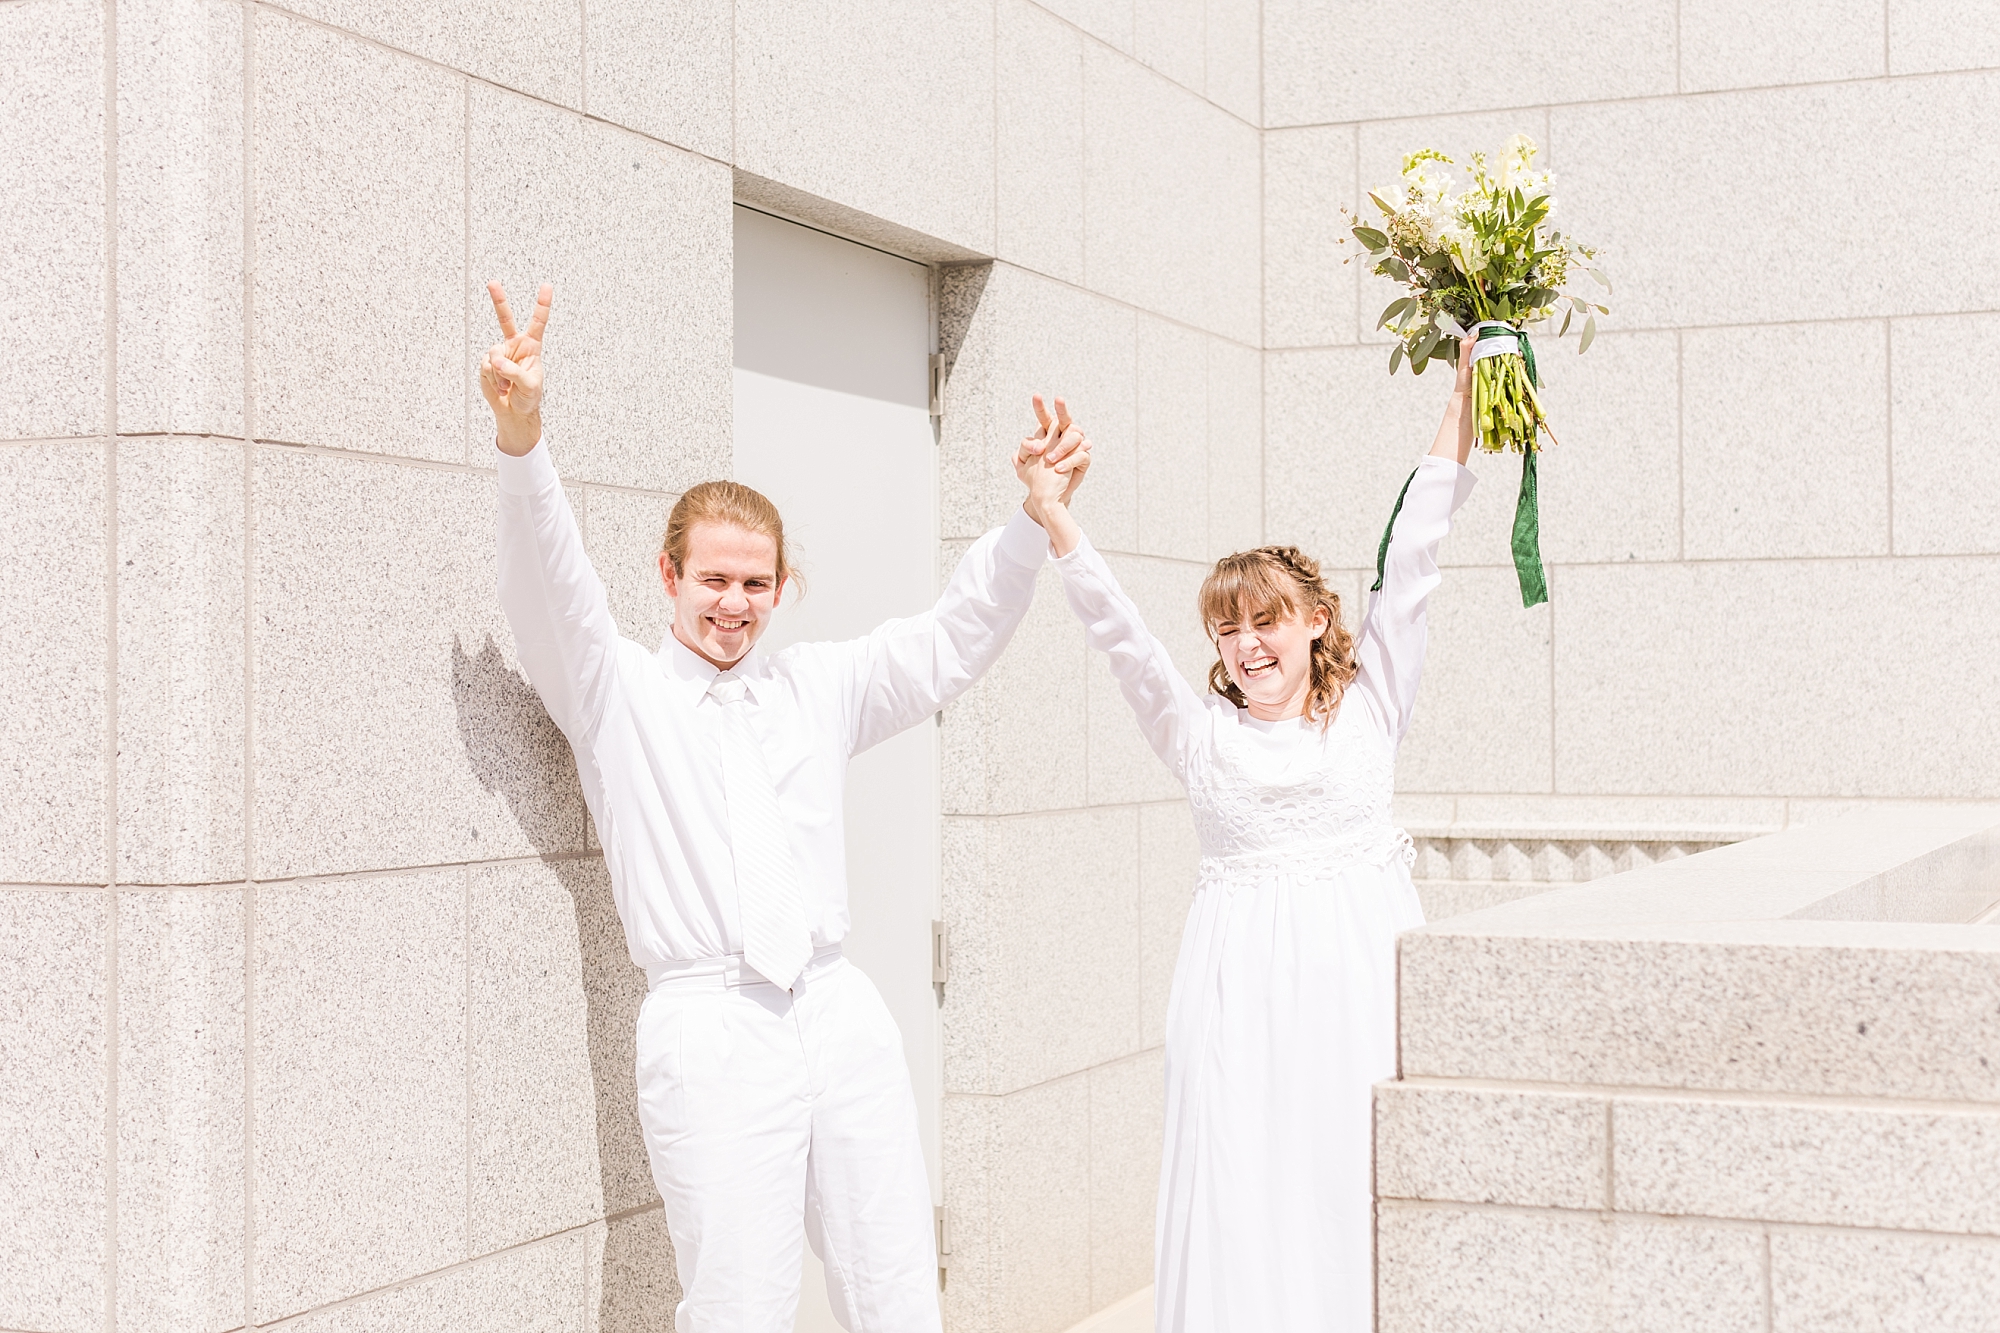 Temple wedding during Covid